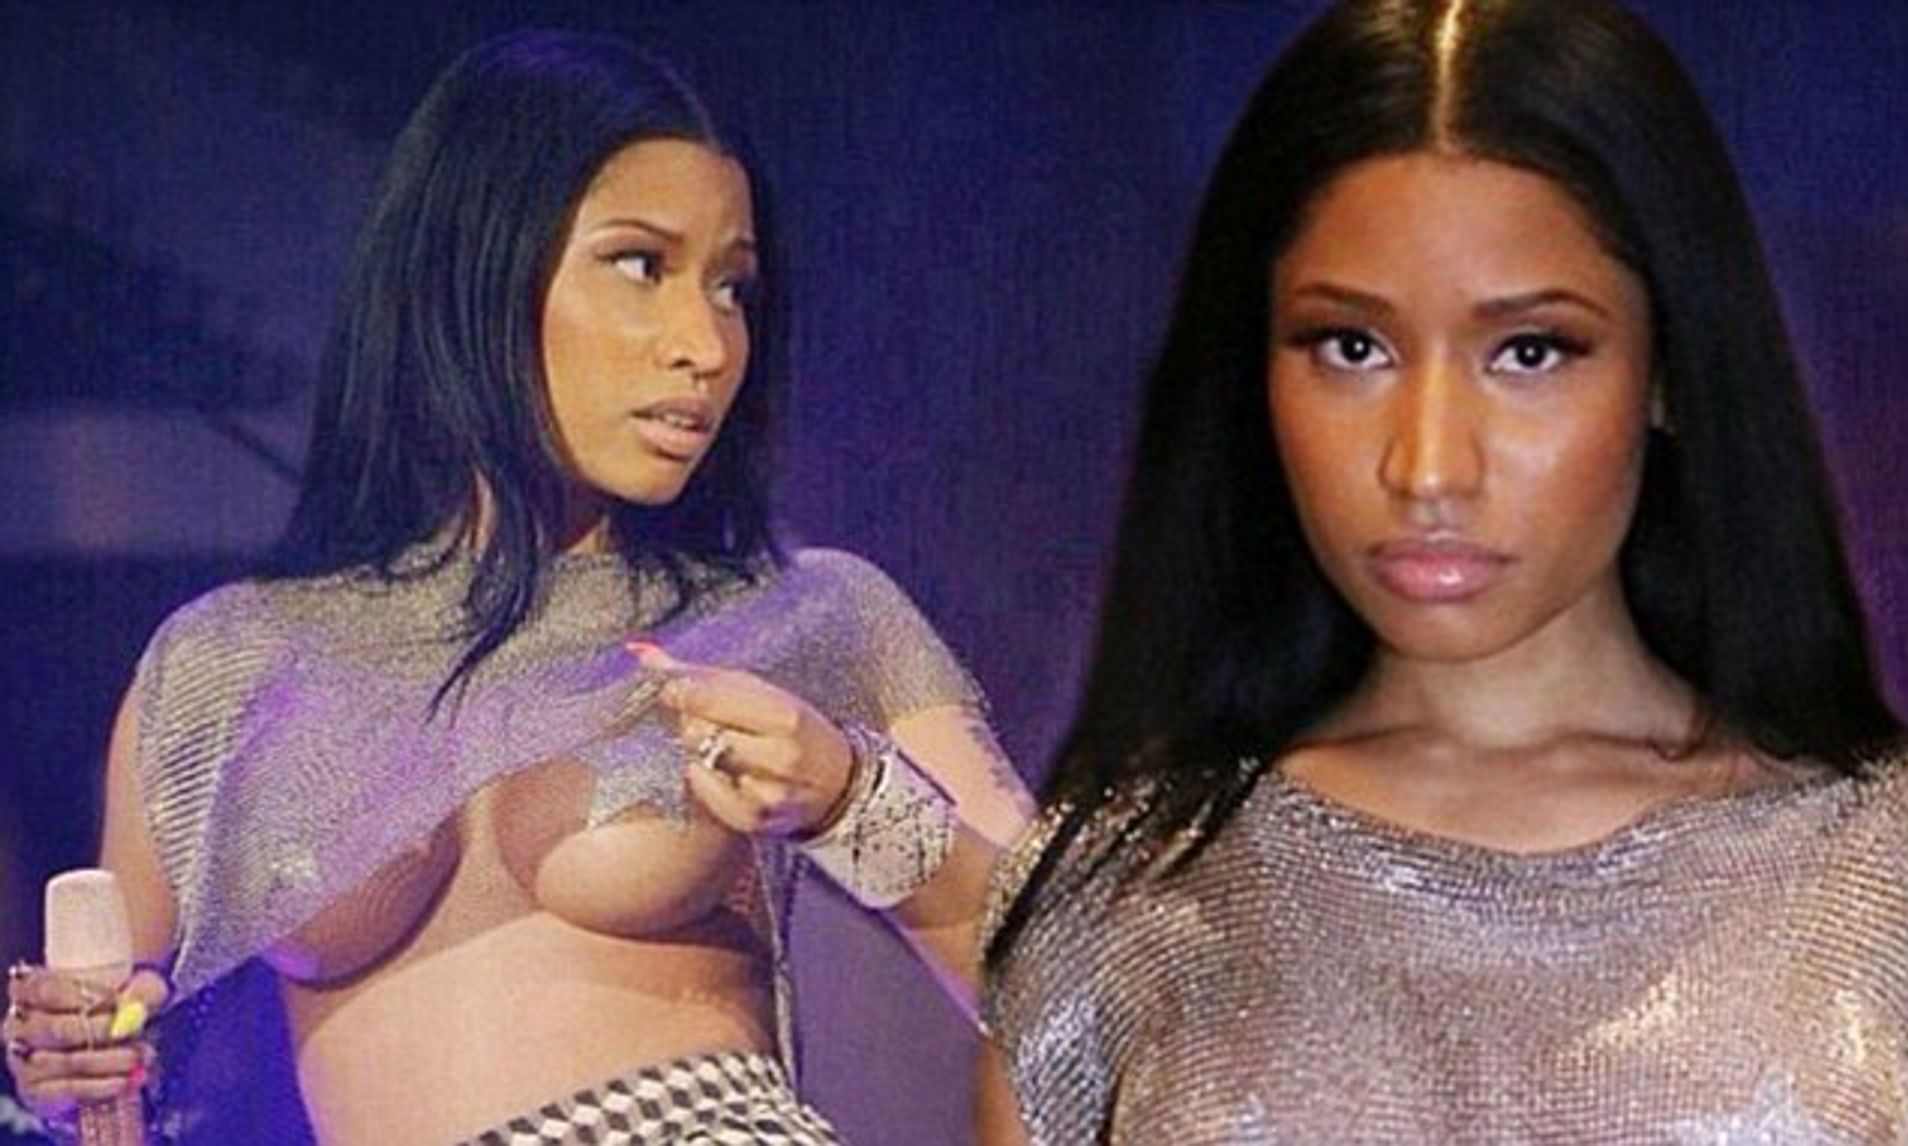 chanyong kim recommends nicki minaj playing with her boobs pic